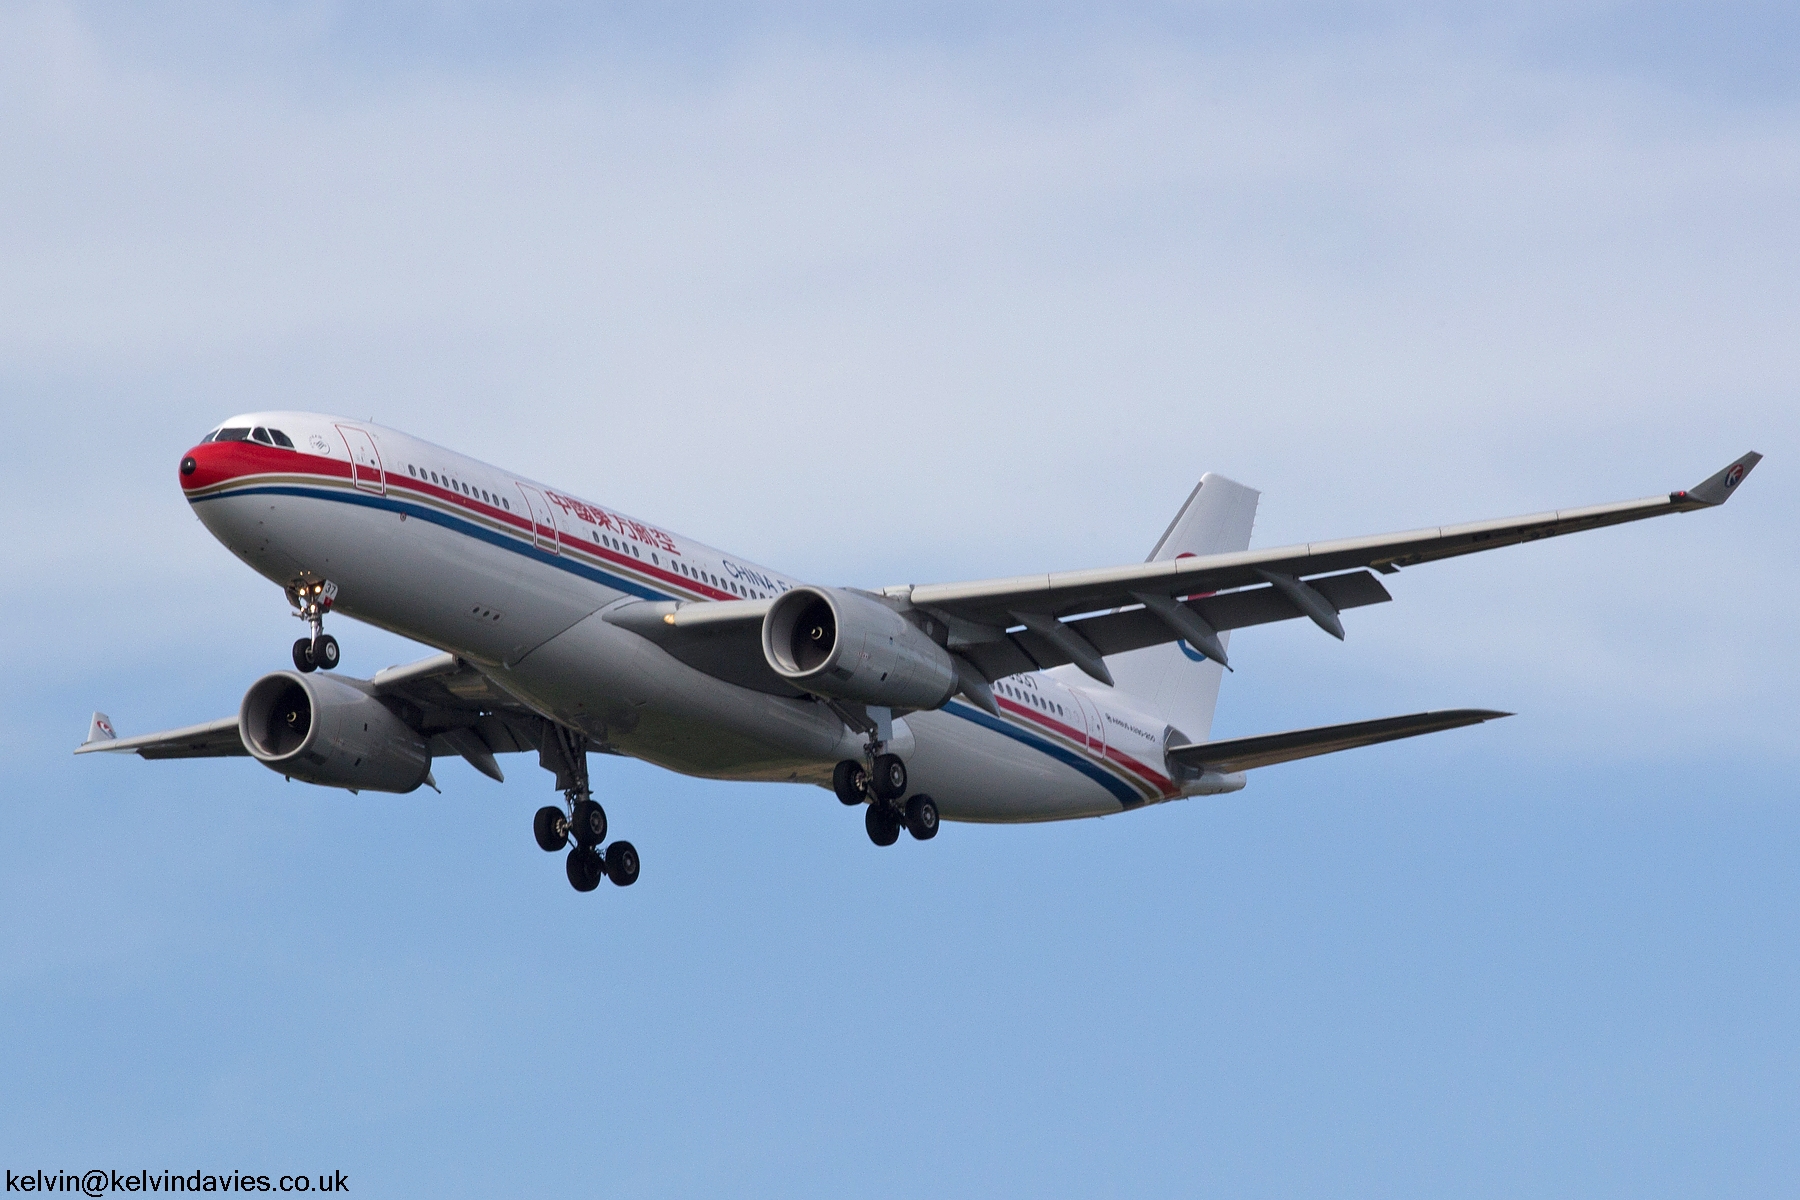 China Eastern Airlines A330 B-5937